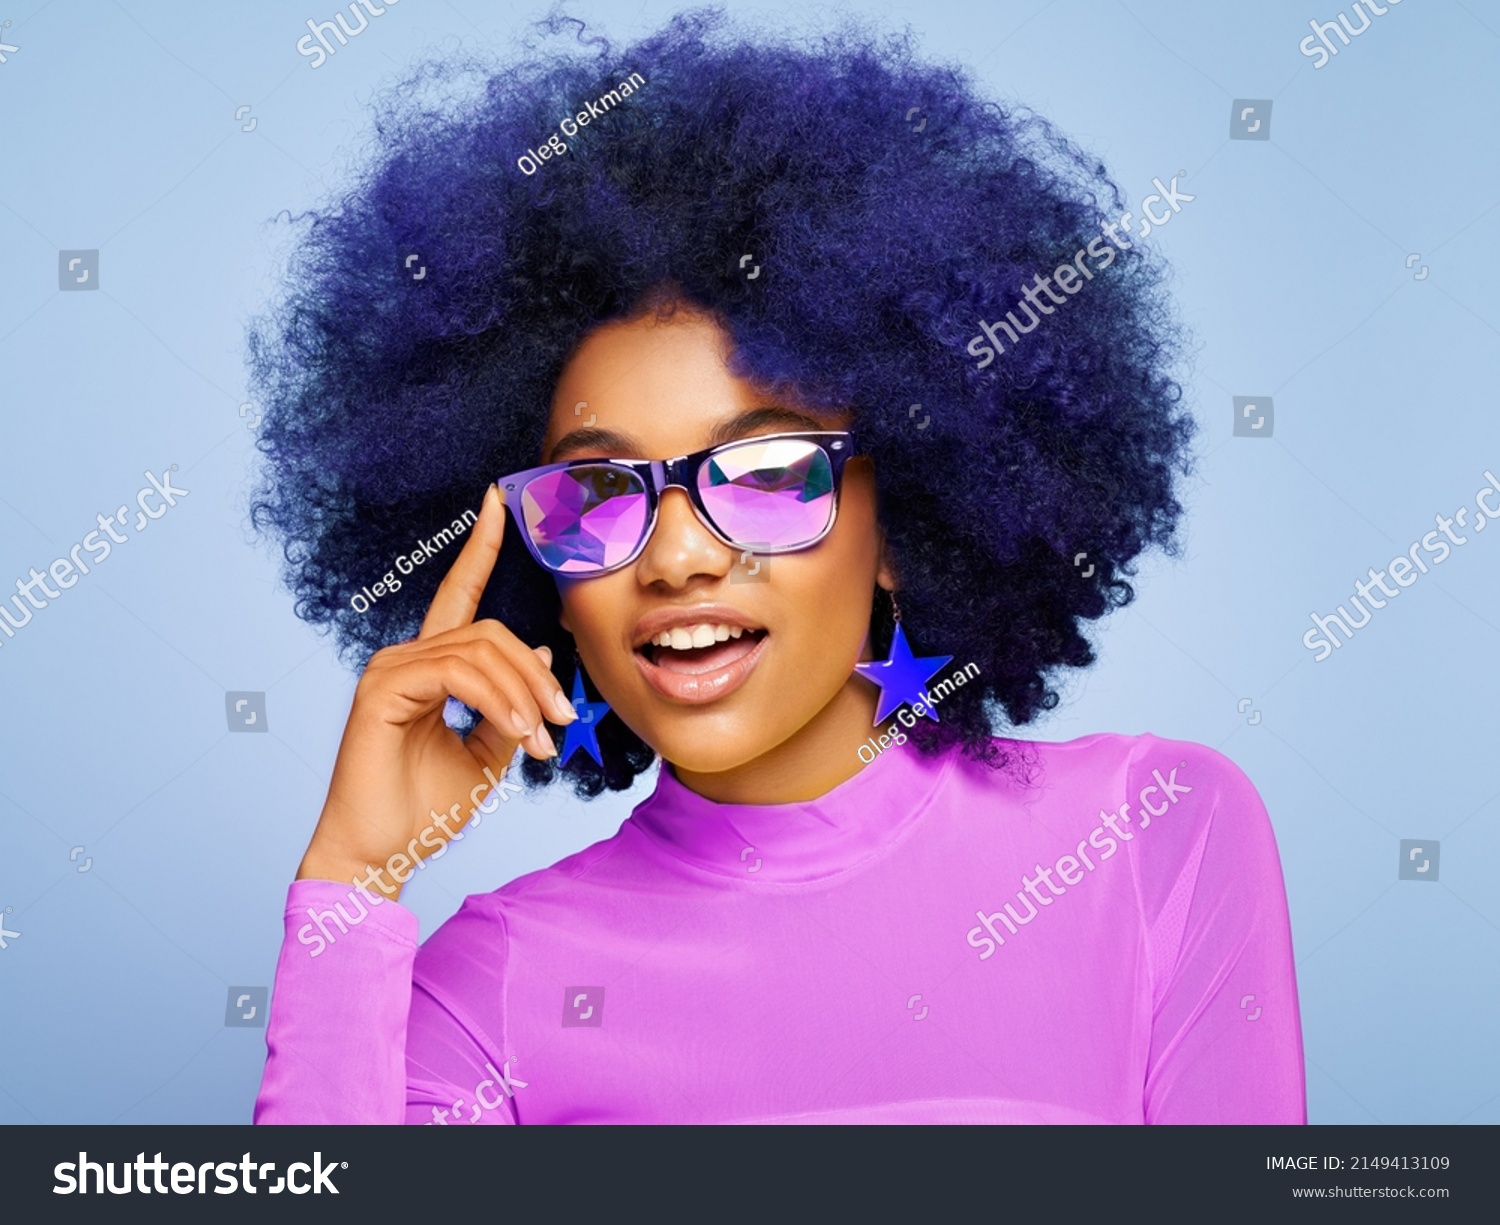 Beauty portrait of African American girl in colored holographic sunglasses. Beautiful black woman on blue background. Cosmetics, makeup and fashion #2149413109